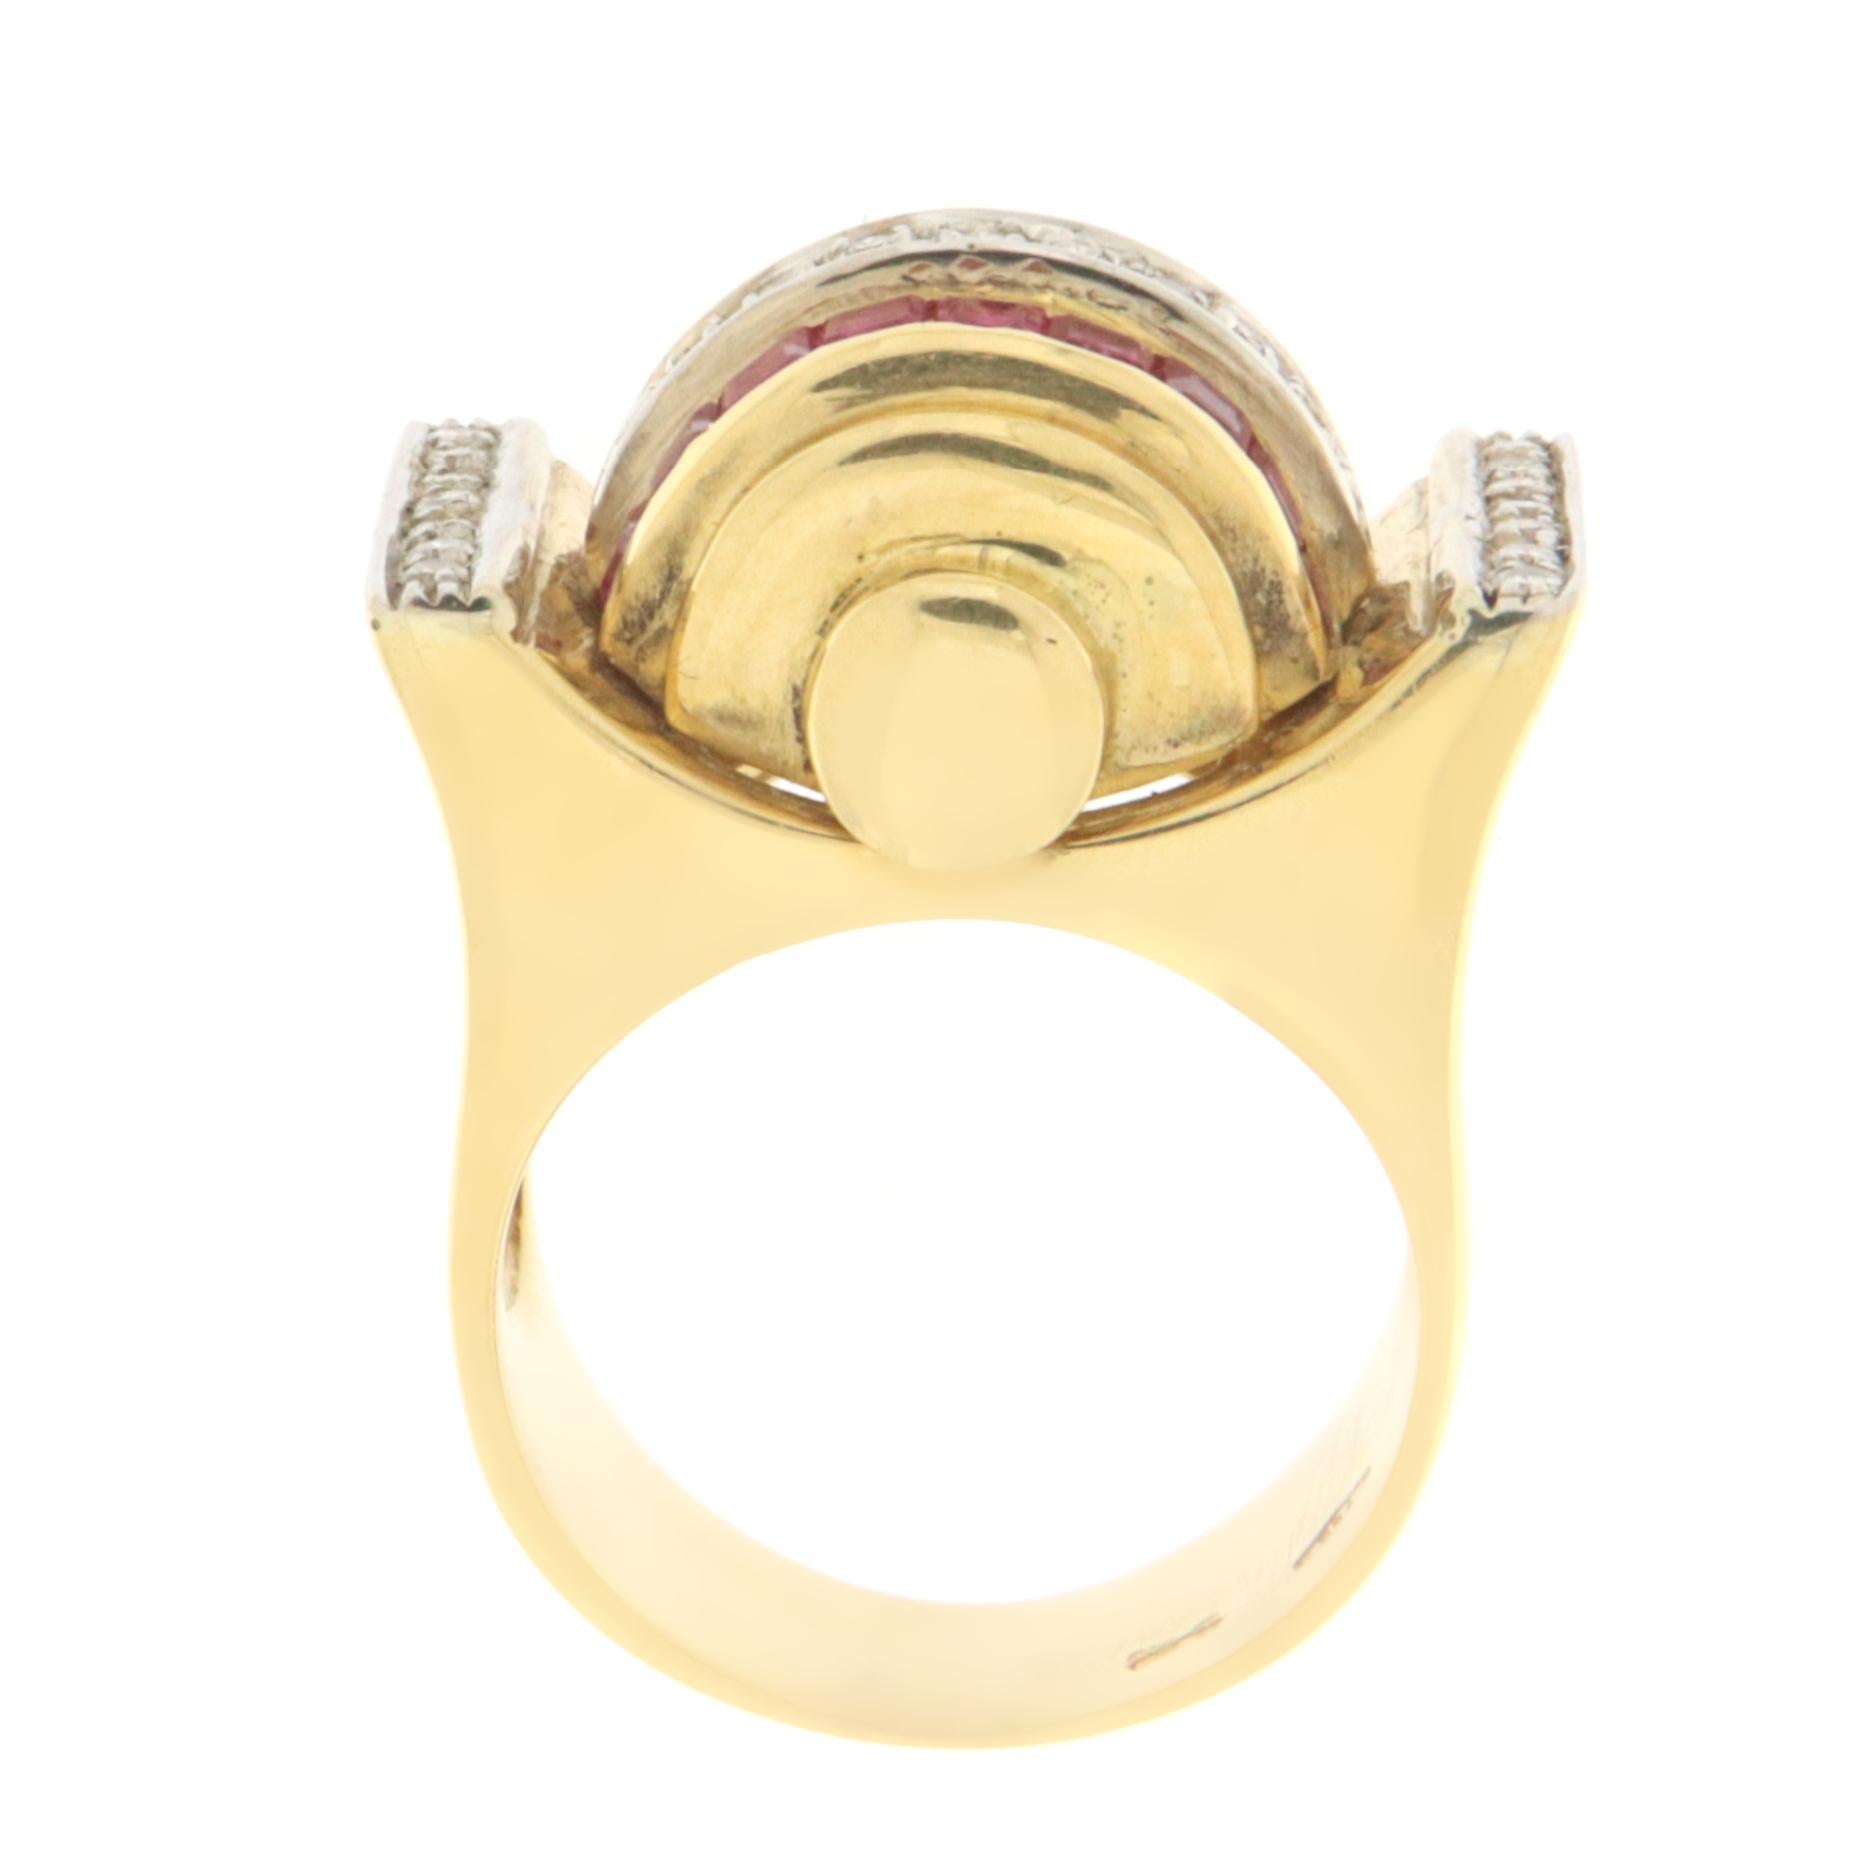 Rubies Diamonds 18 Karat Yellow Gold Cocktail Ring In New Condition For Sale In Marcianise, IT